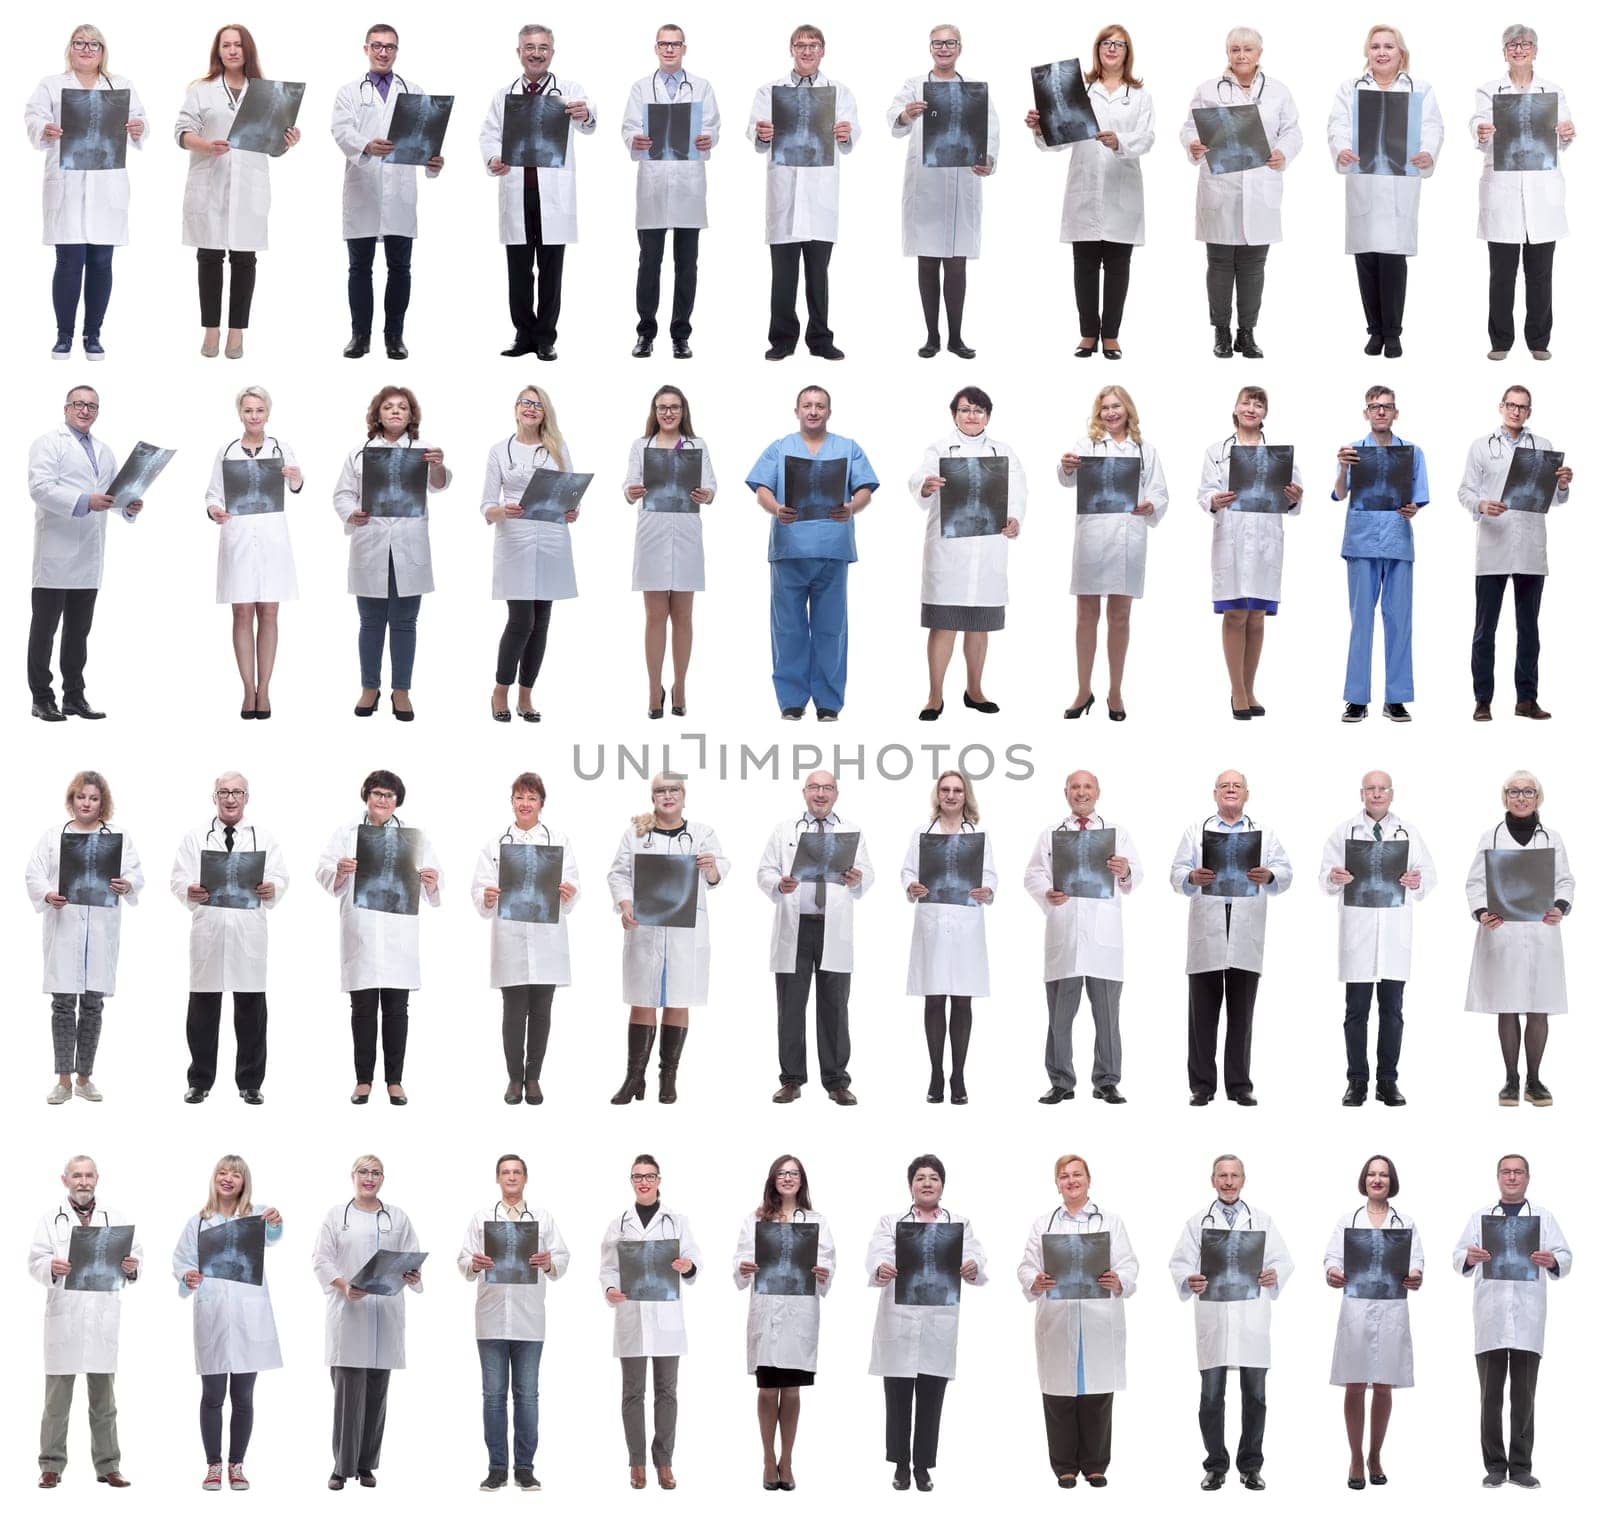 group of doctors holding x-ray isolated on white by asdf